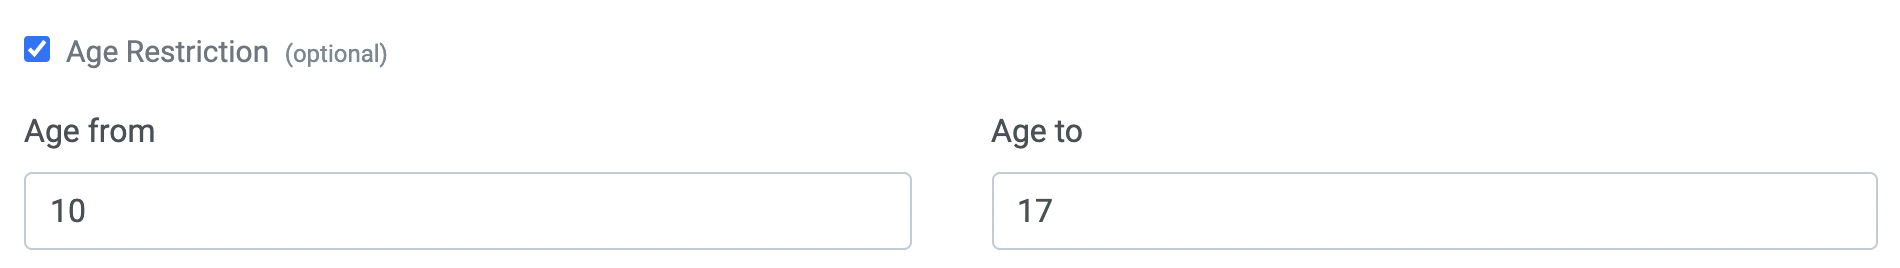 Age_restriction.png